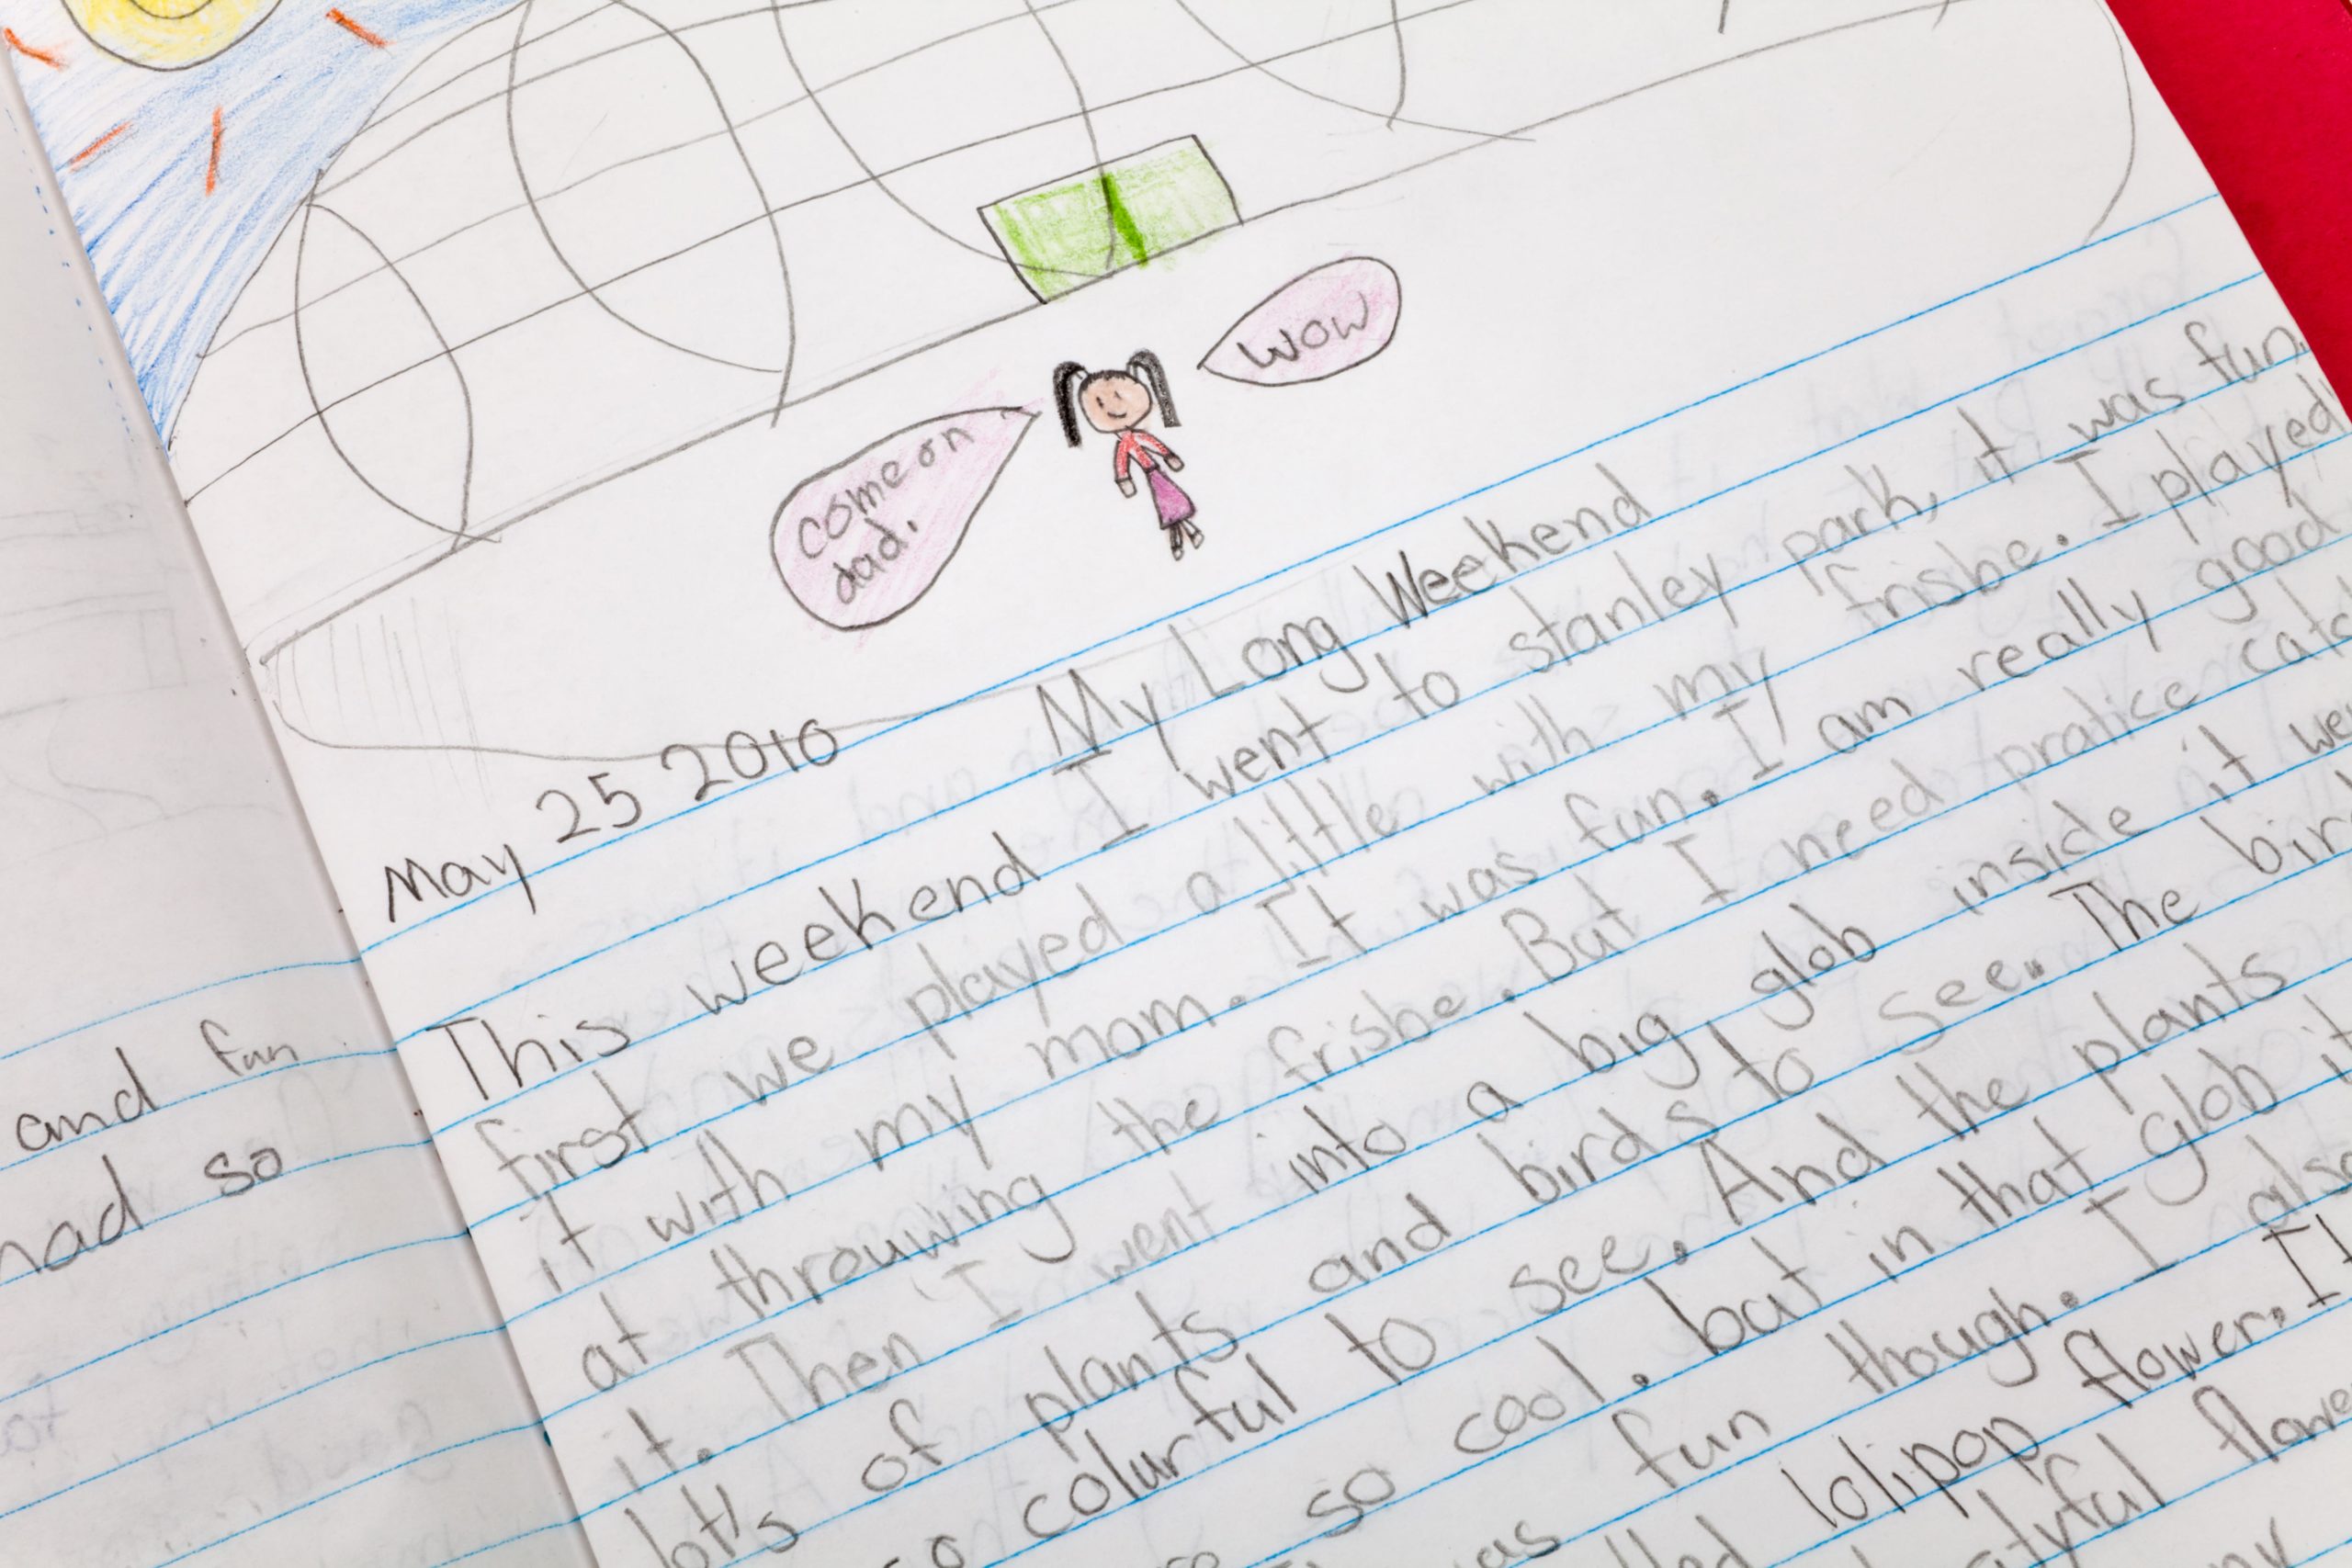 A close-up shot of a student's journal entry